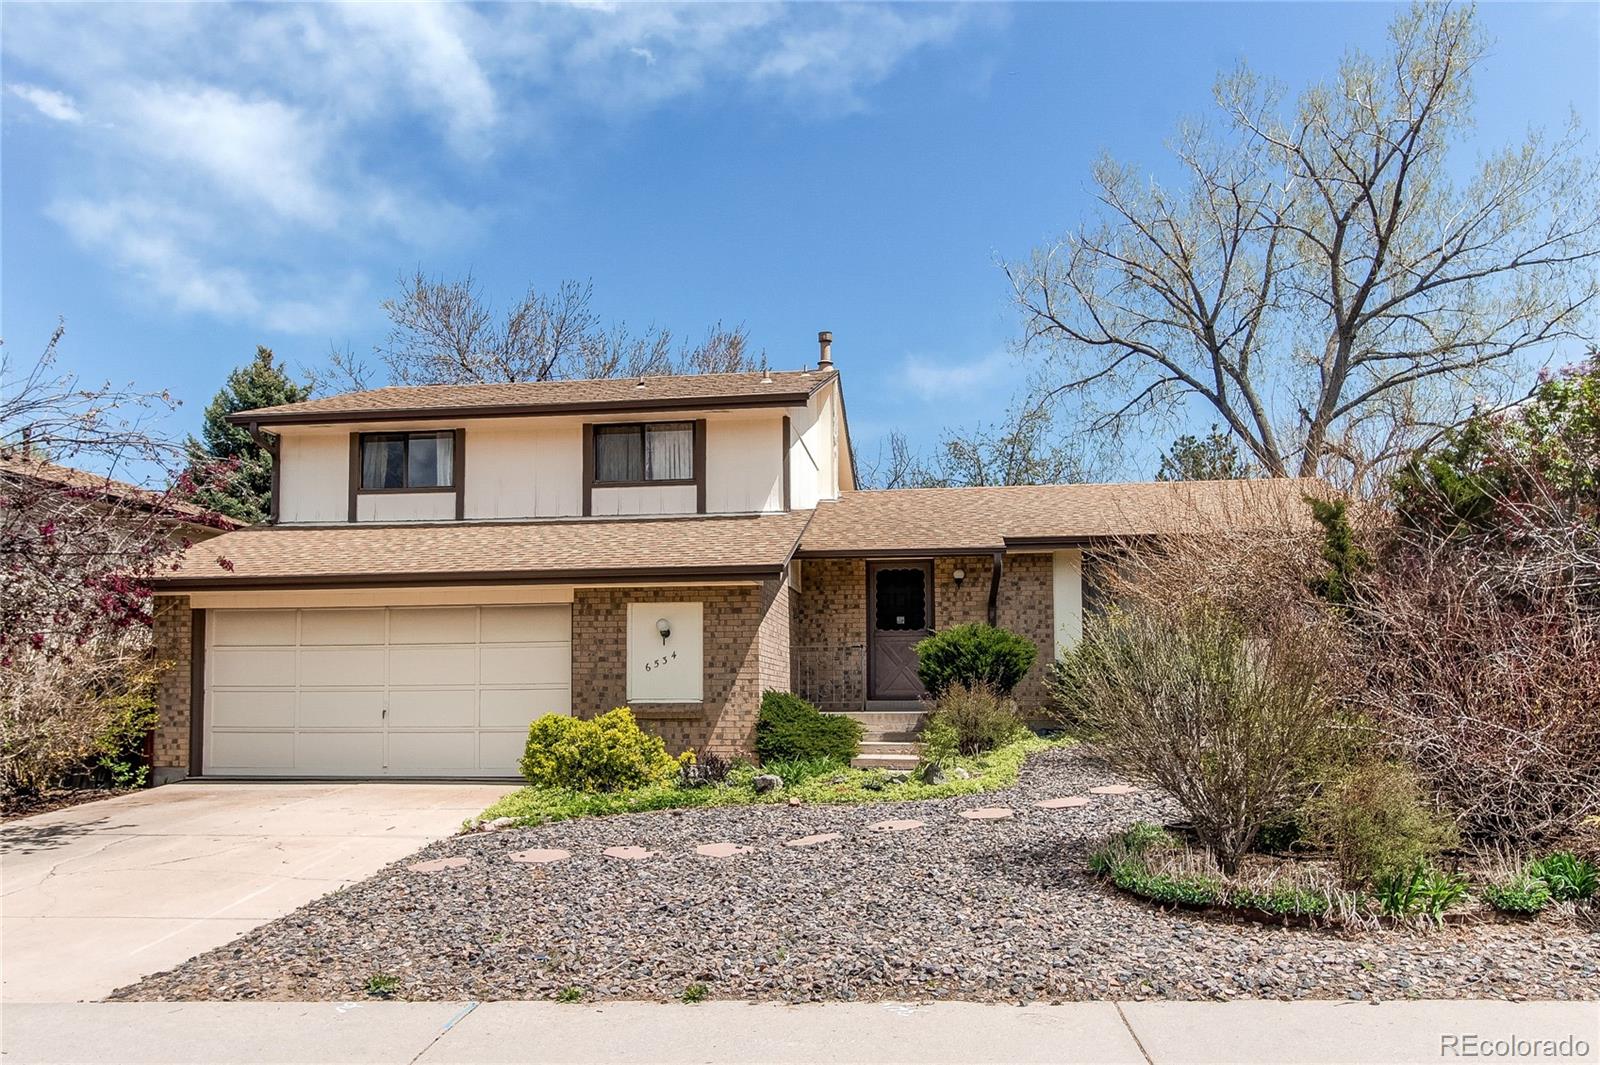 6534 s balsam court, Littleton sold home. Closed on 2024-05-10 for $548,000.